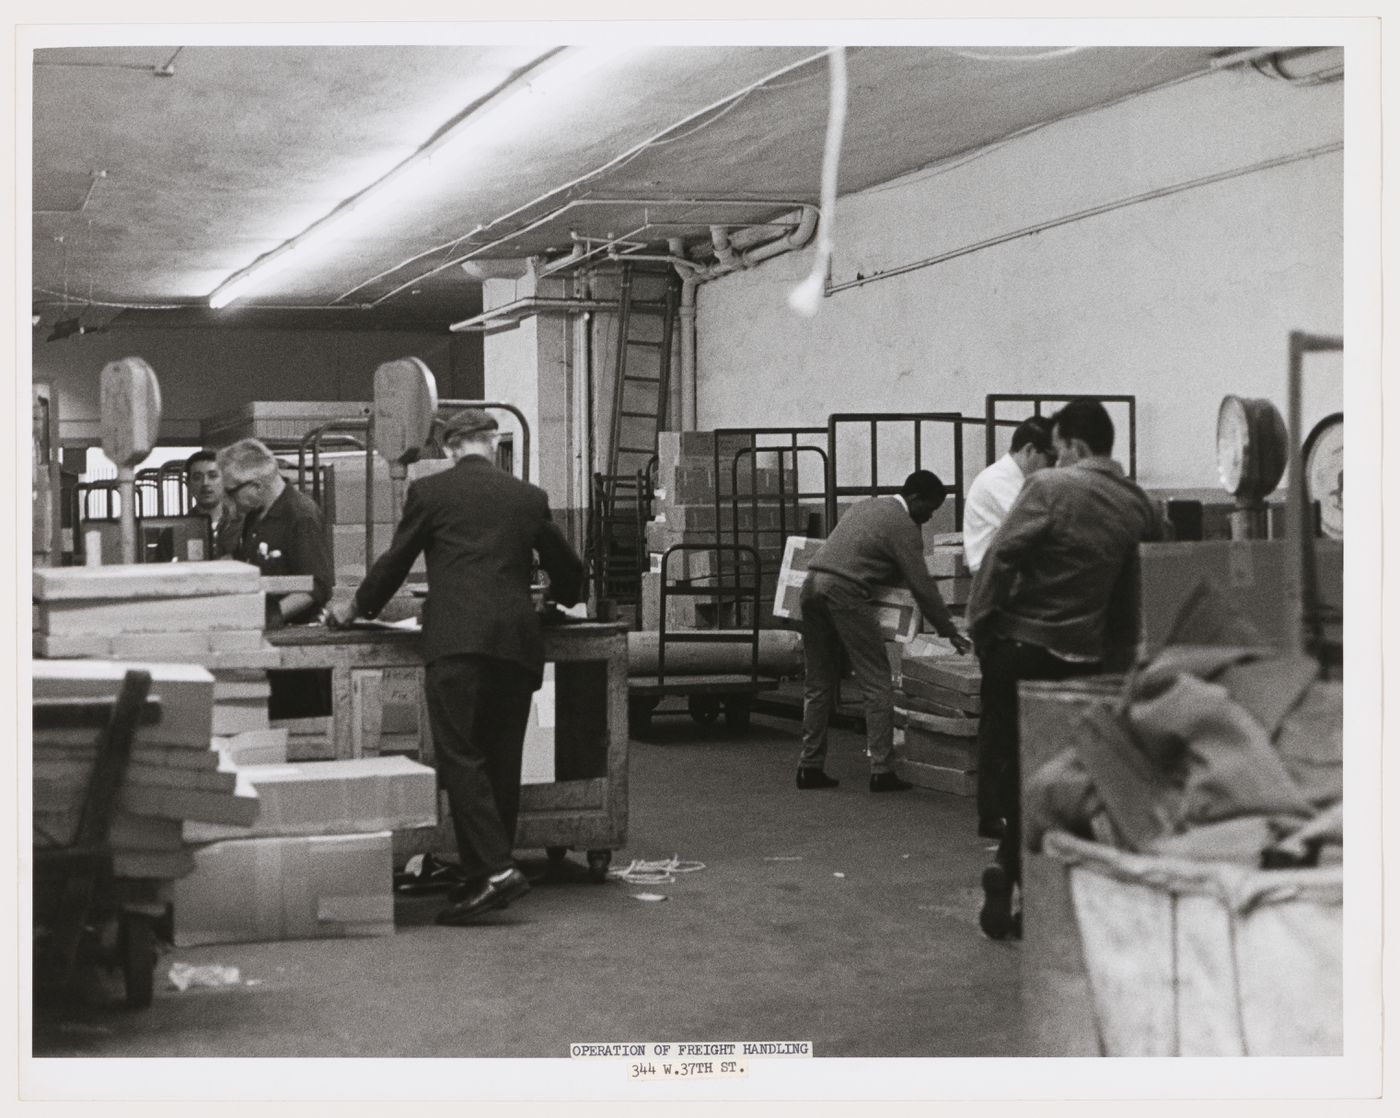 Interior view of a building showing workers handling freight, West 37th Street, Manhattan, New York City, New York